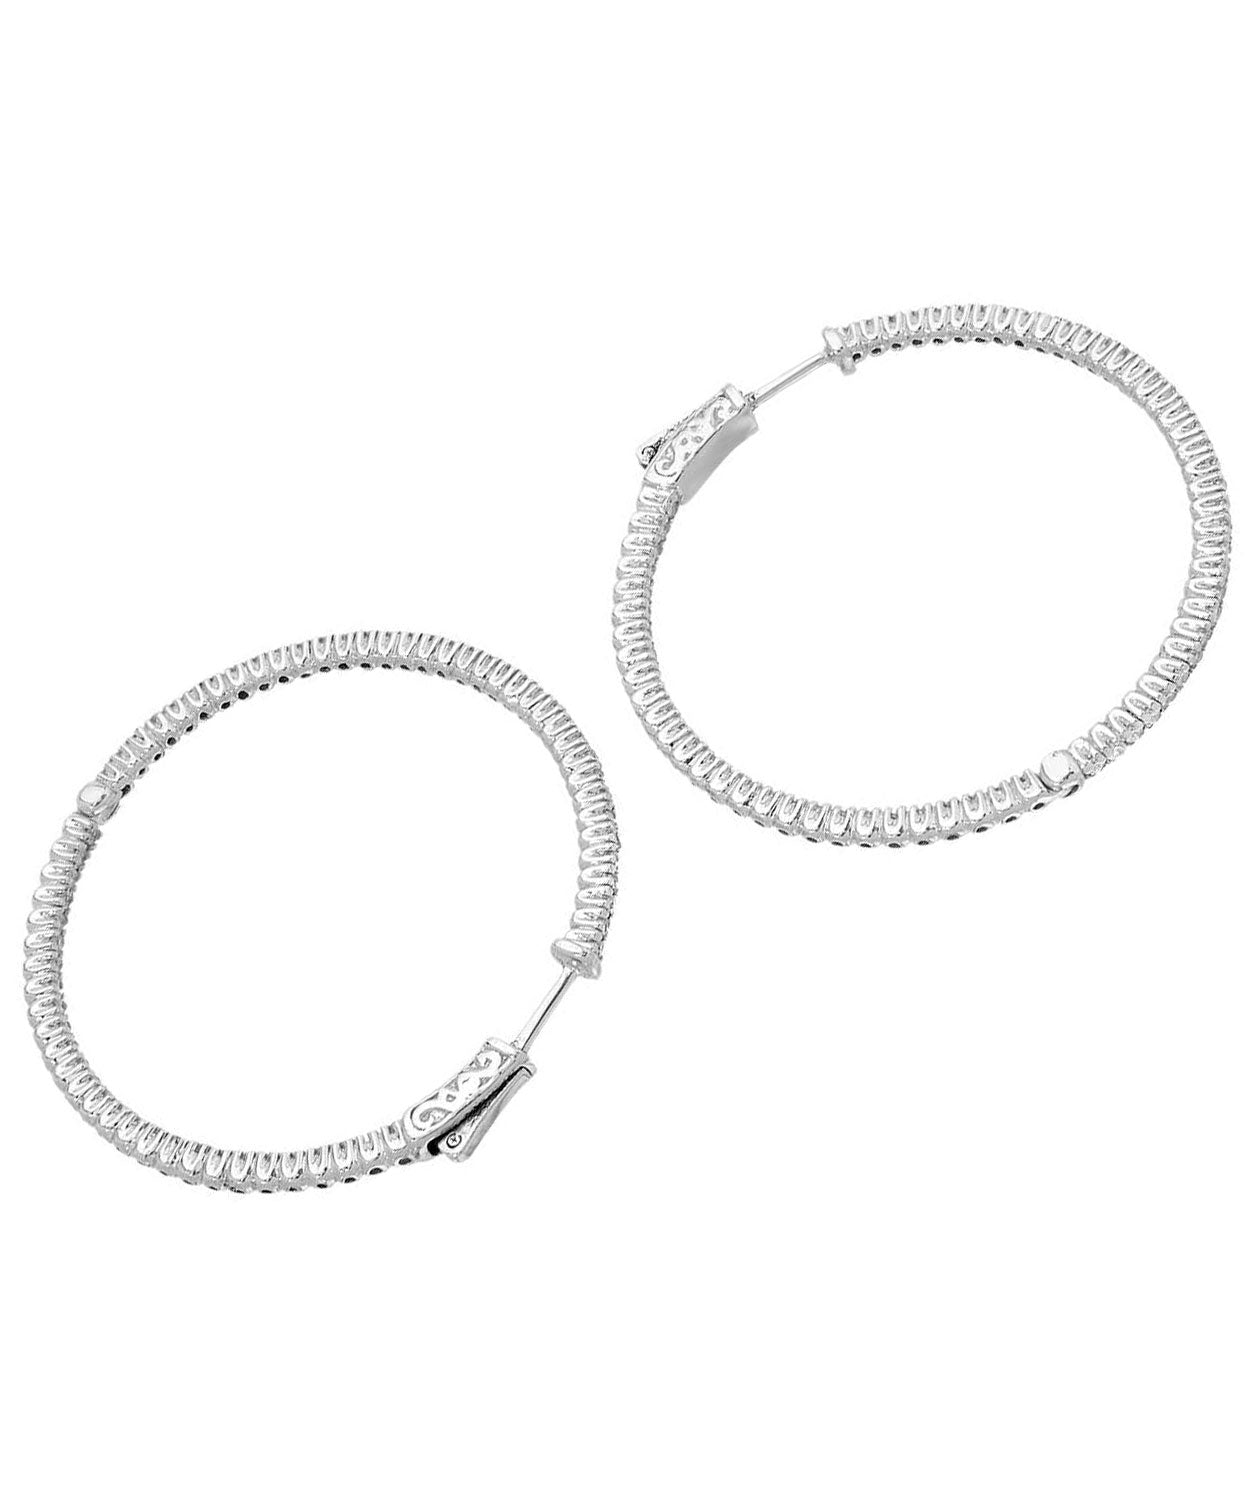 Allure Collection 1.65 ctw Diamond 14k White Gold Inside-Out Hoop Earrings View 2